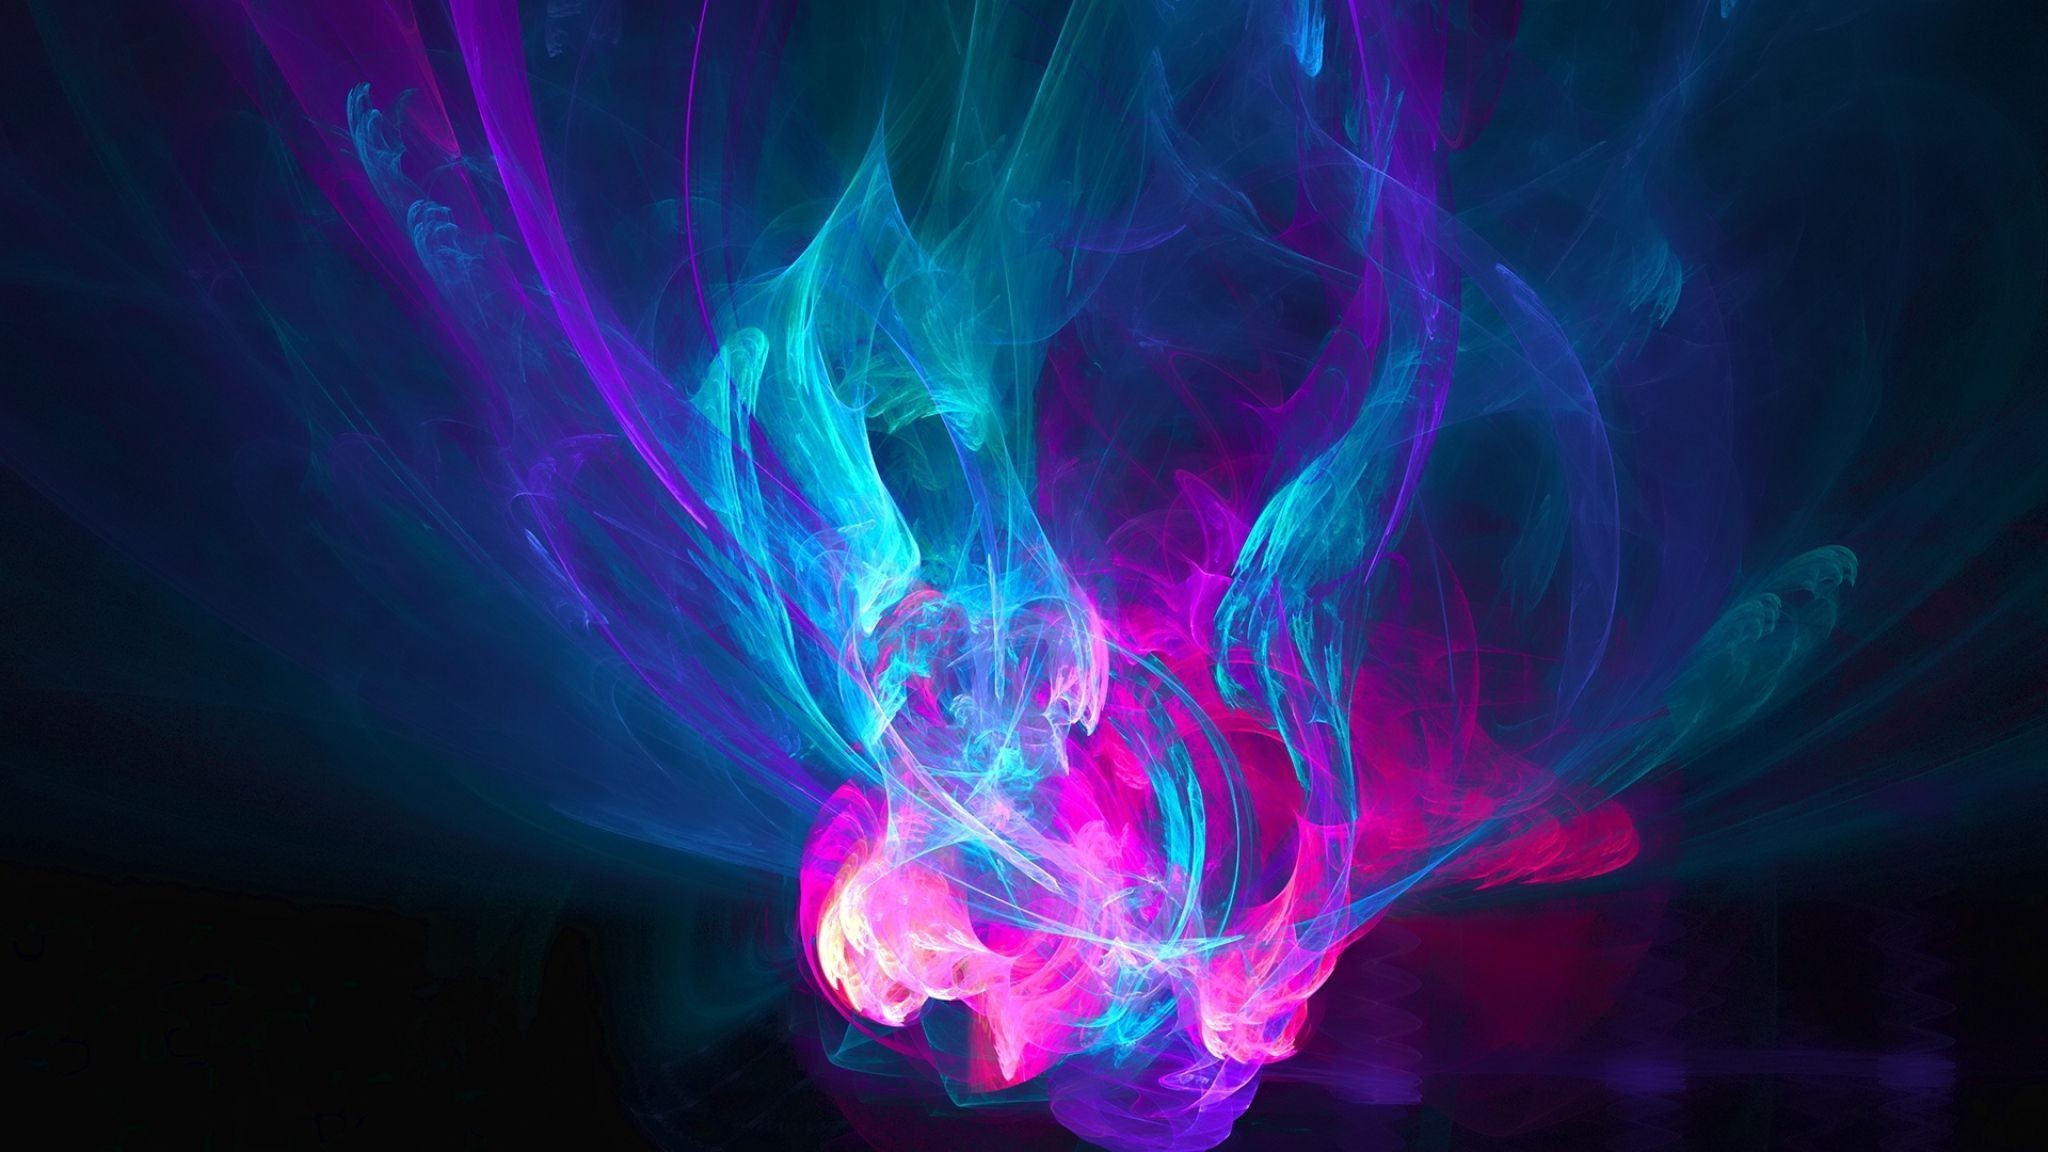 2048x1152 Download Wallpaper  Abstraction, Light, Pink, Blue .